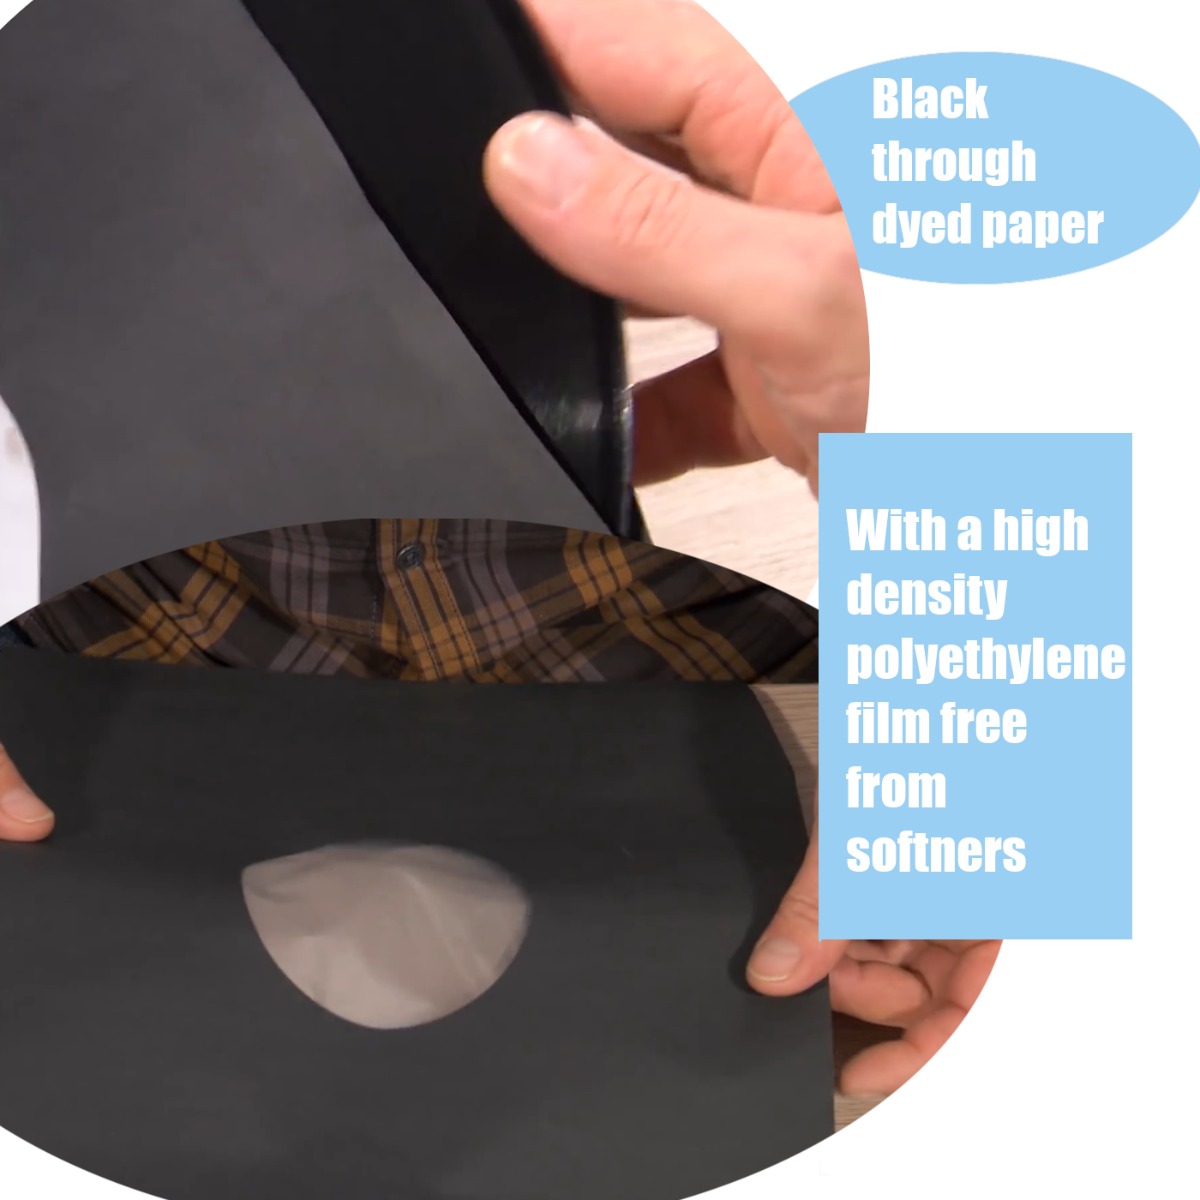 Polylined Paper 12 Inner Vinyl Record Anti Static Sleeve, black 80 grs.  paper - bevelled corners, 12-inch LP Sleeves